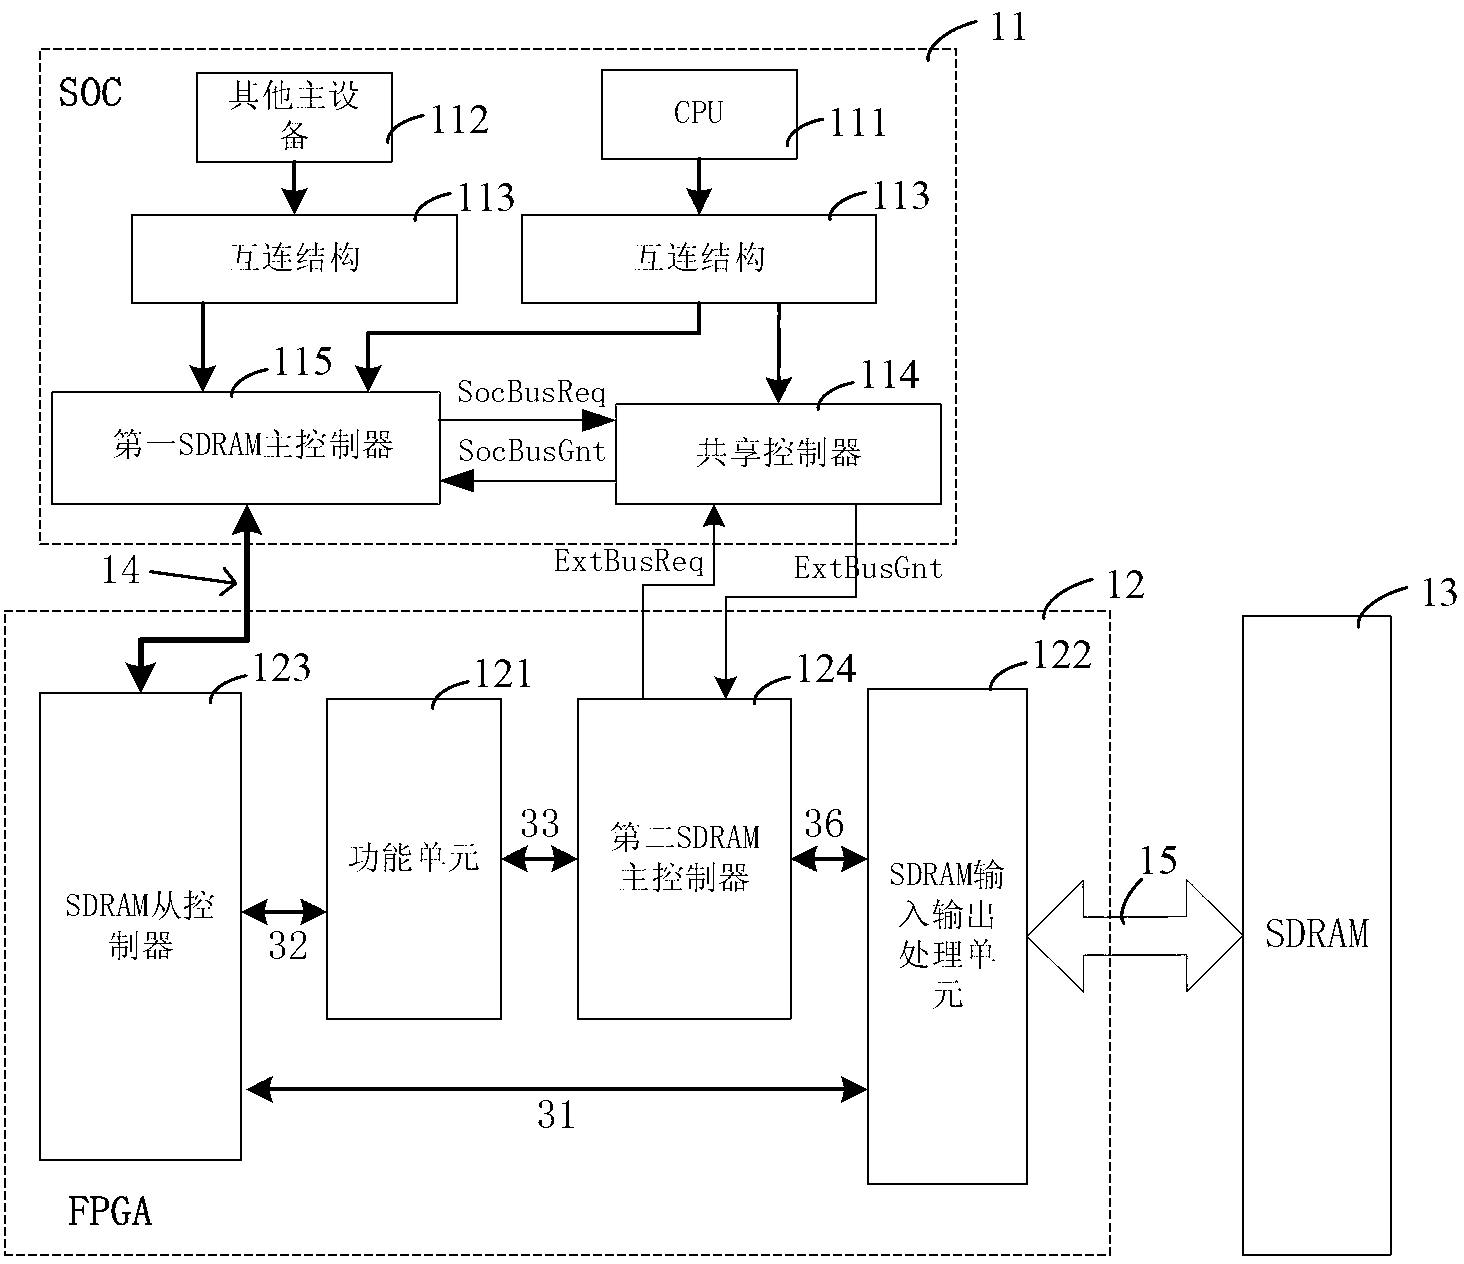 Computing device extension system for system on chip (SOC)